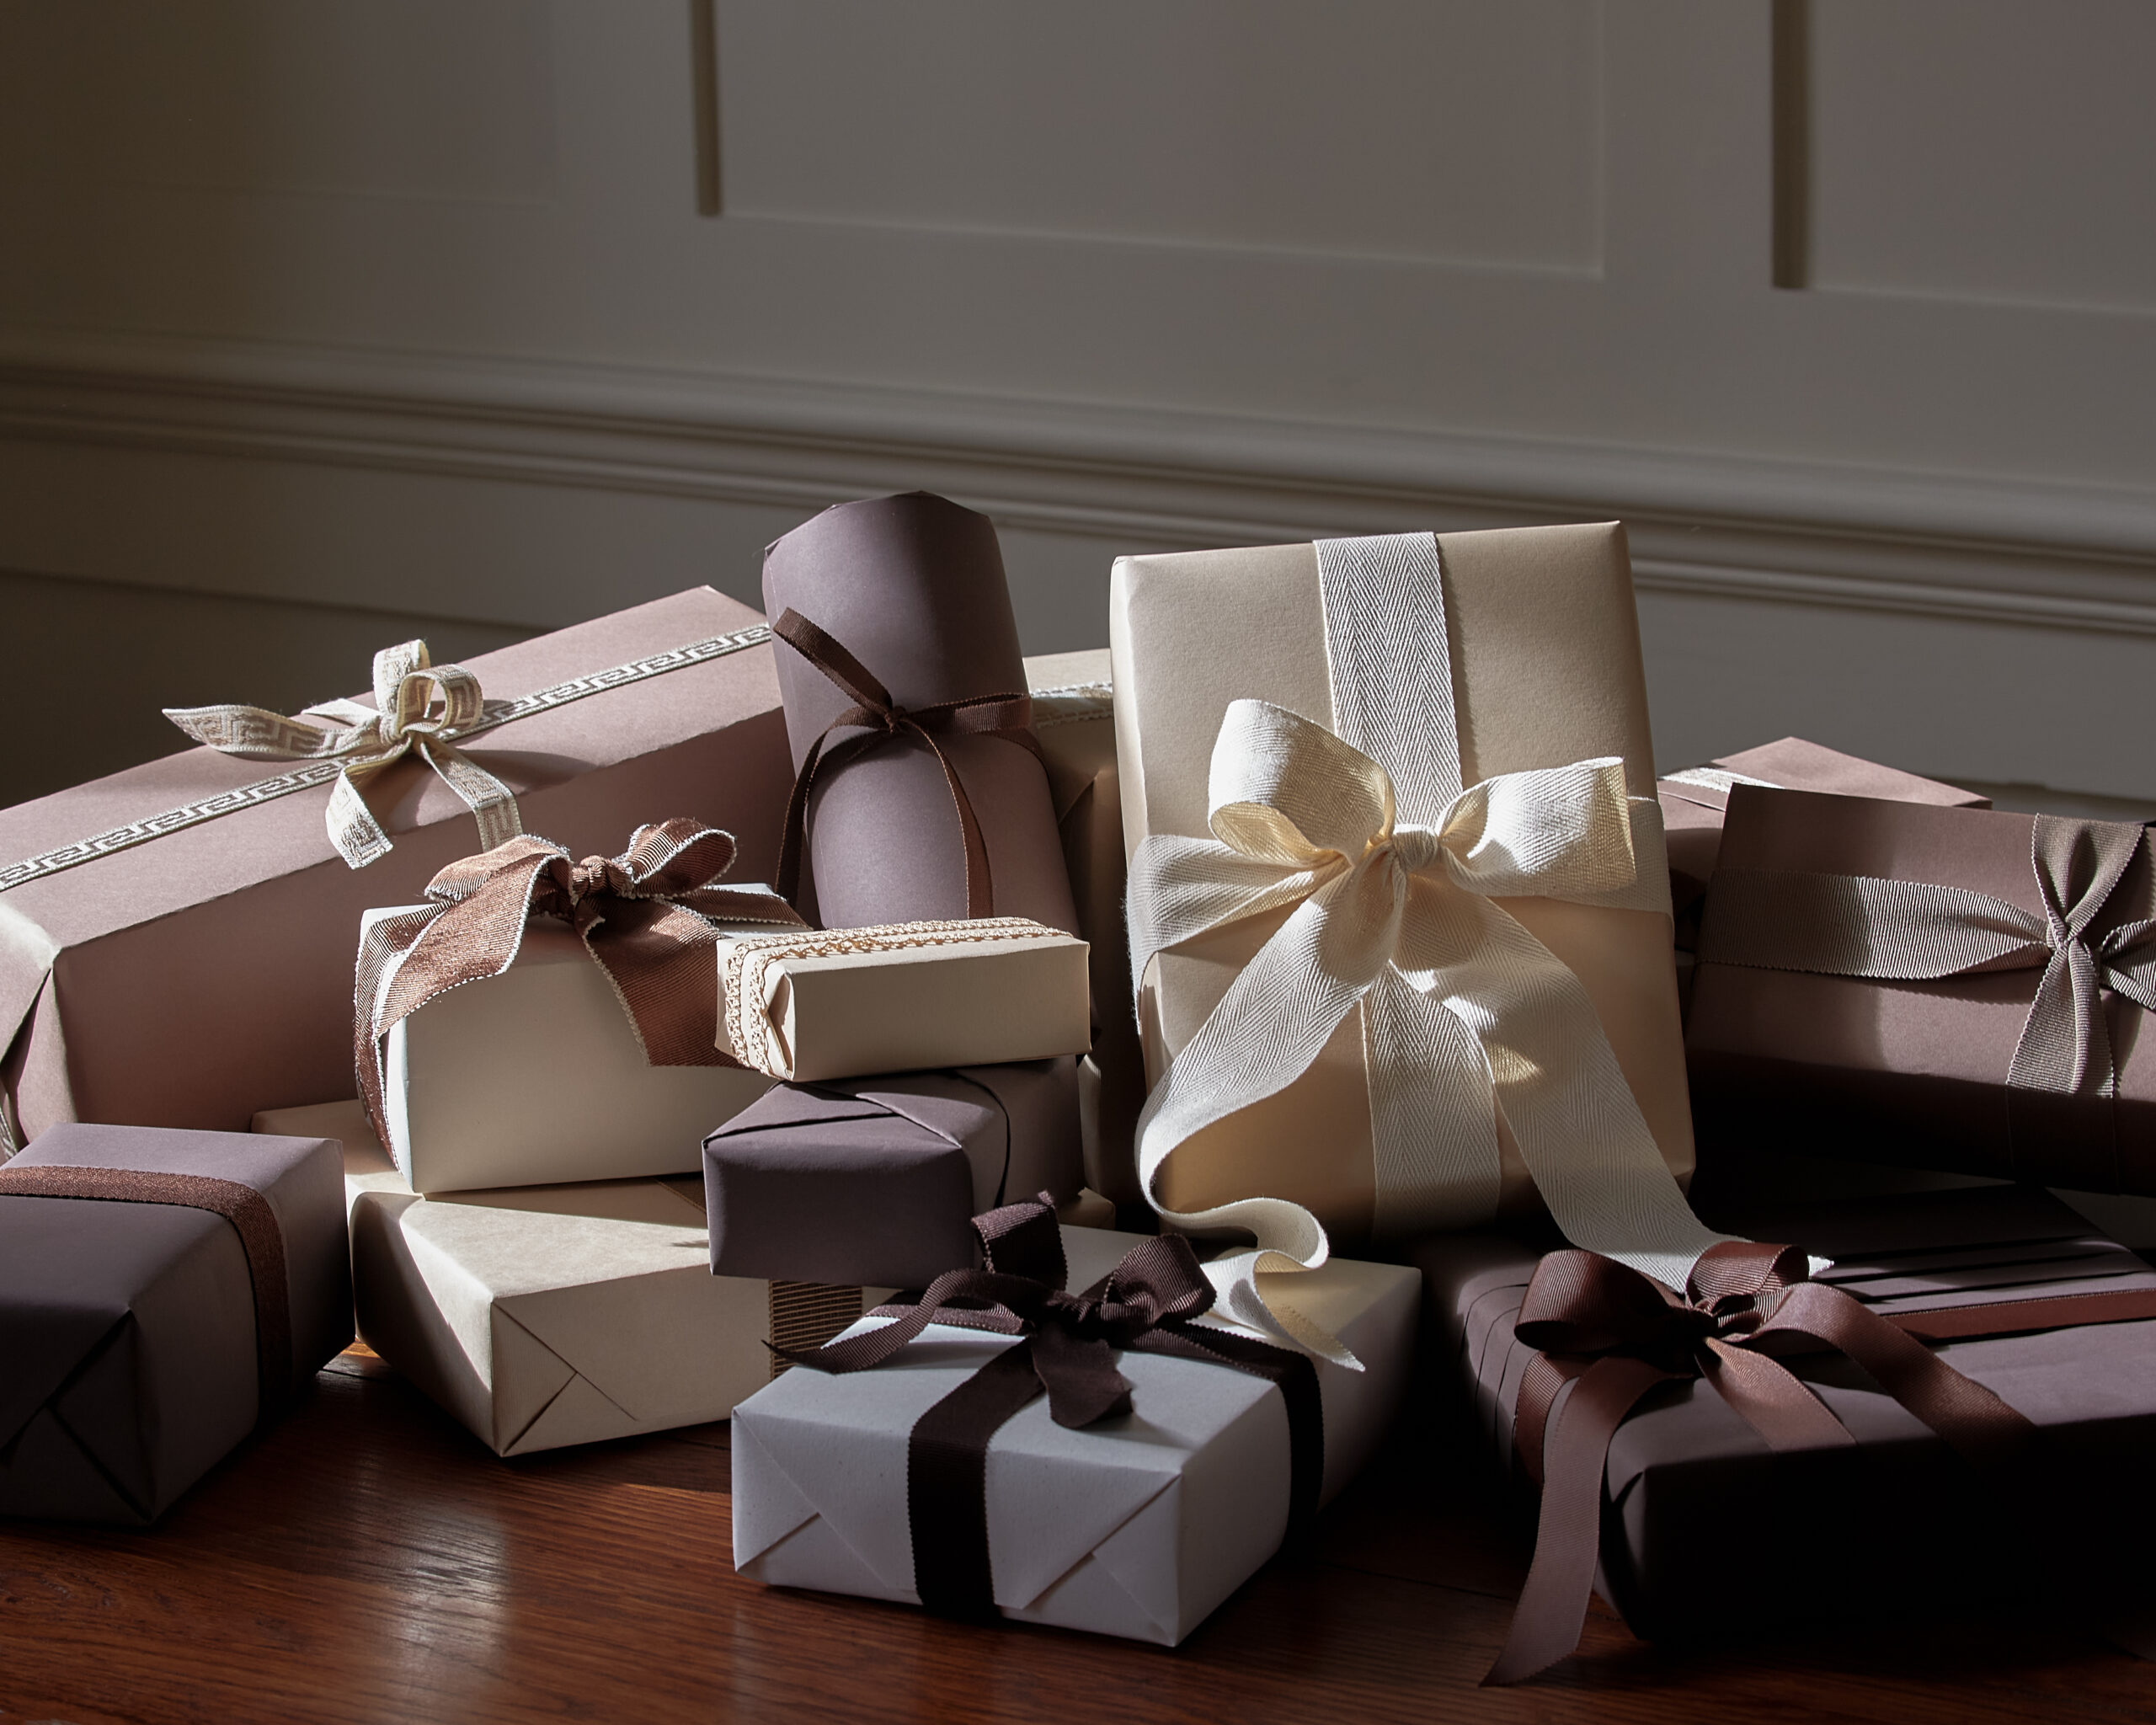 New luxury wrapping service offers a sustainable alternative for corporate gifting